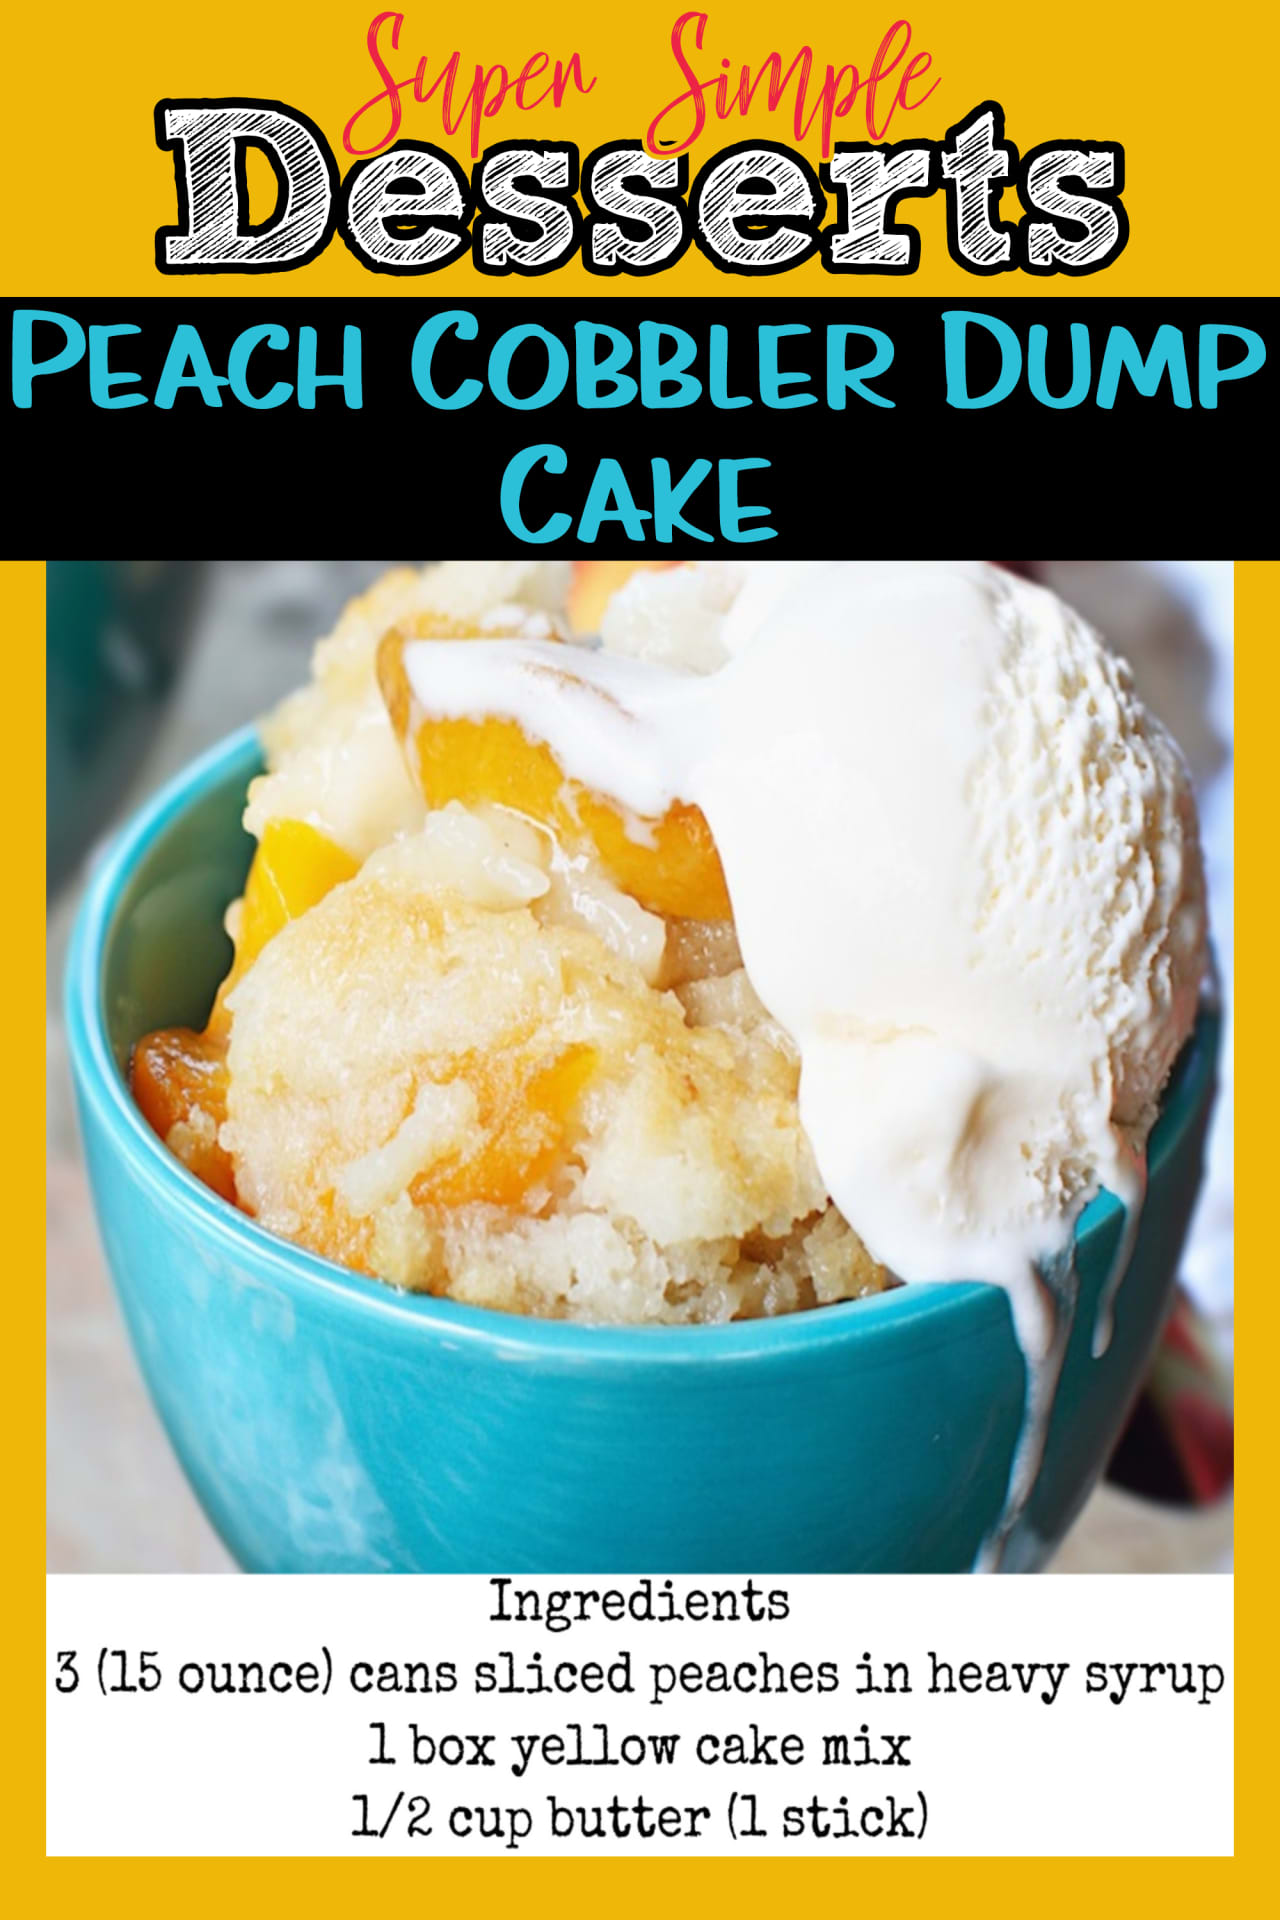 Super simple Desserts for a crowd - easy dump cake recipes - easy peach cobbler with cake mix - peach cobbler dump cake recipe